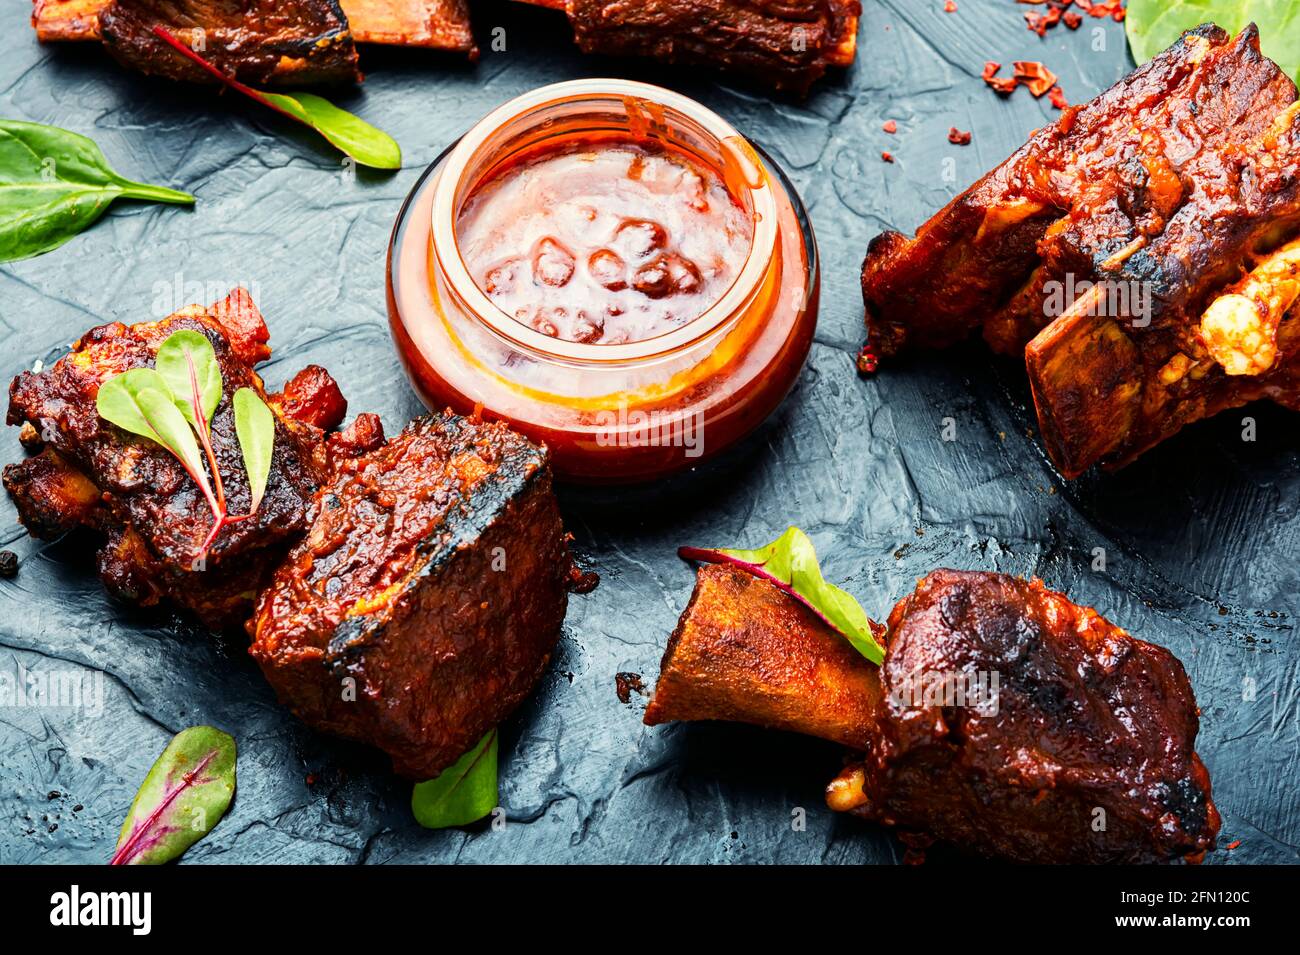 Smoked beef ribs with bone and gravy Stock Photo